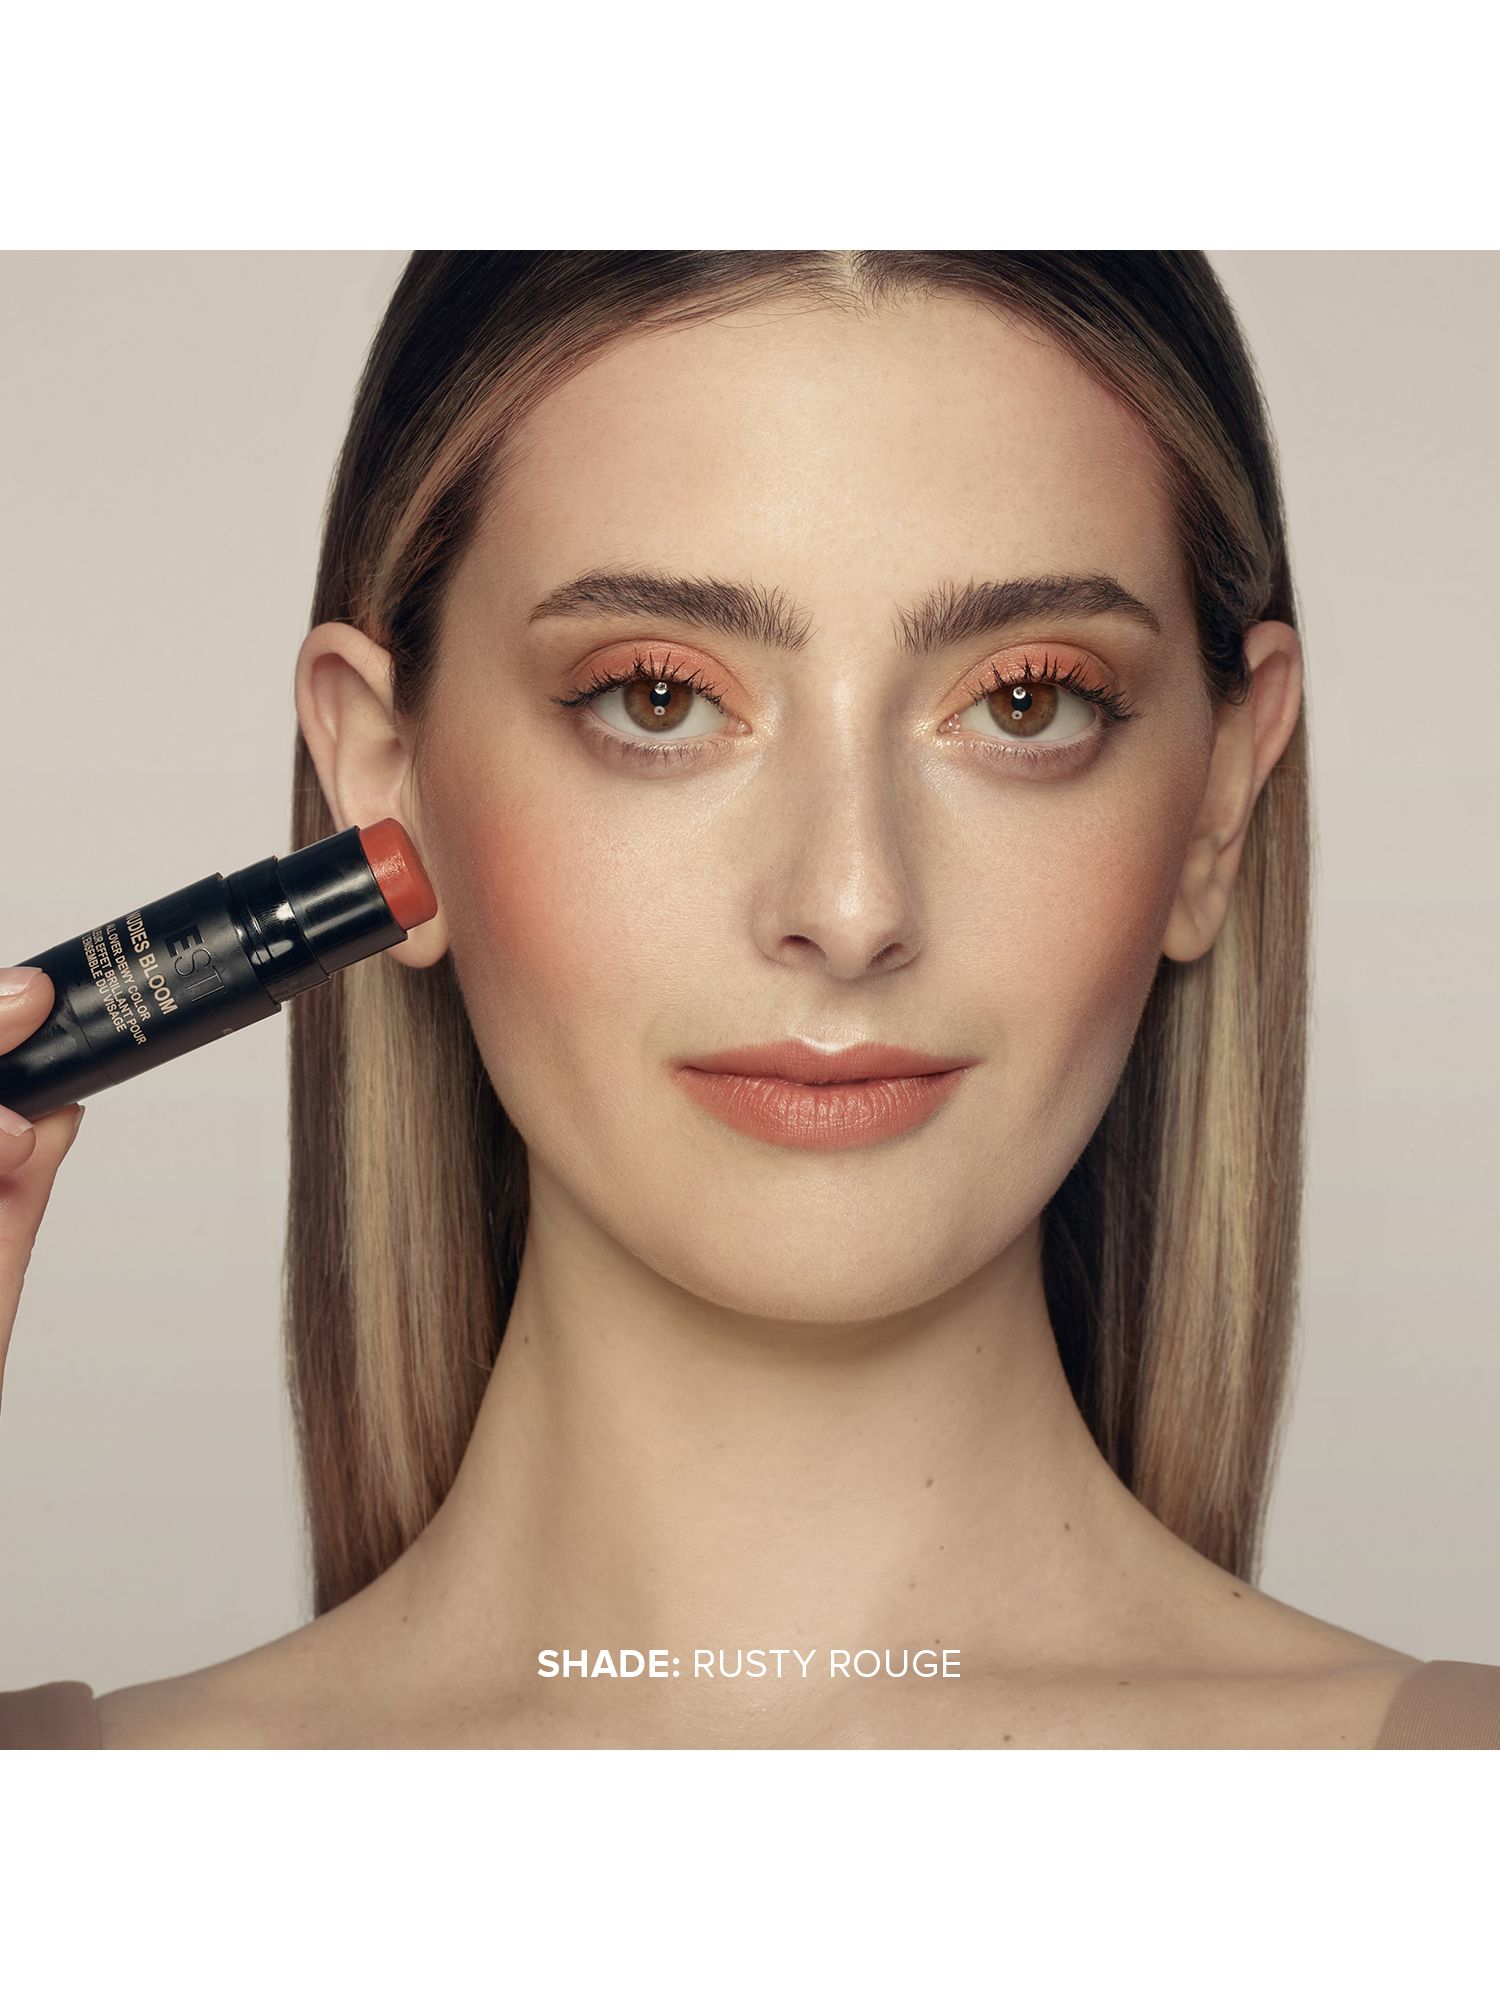 Nudestix Nudies Bloom All-Over Face Dewy Colour, Rusty Rouge